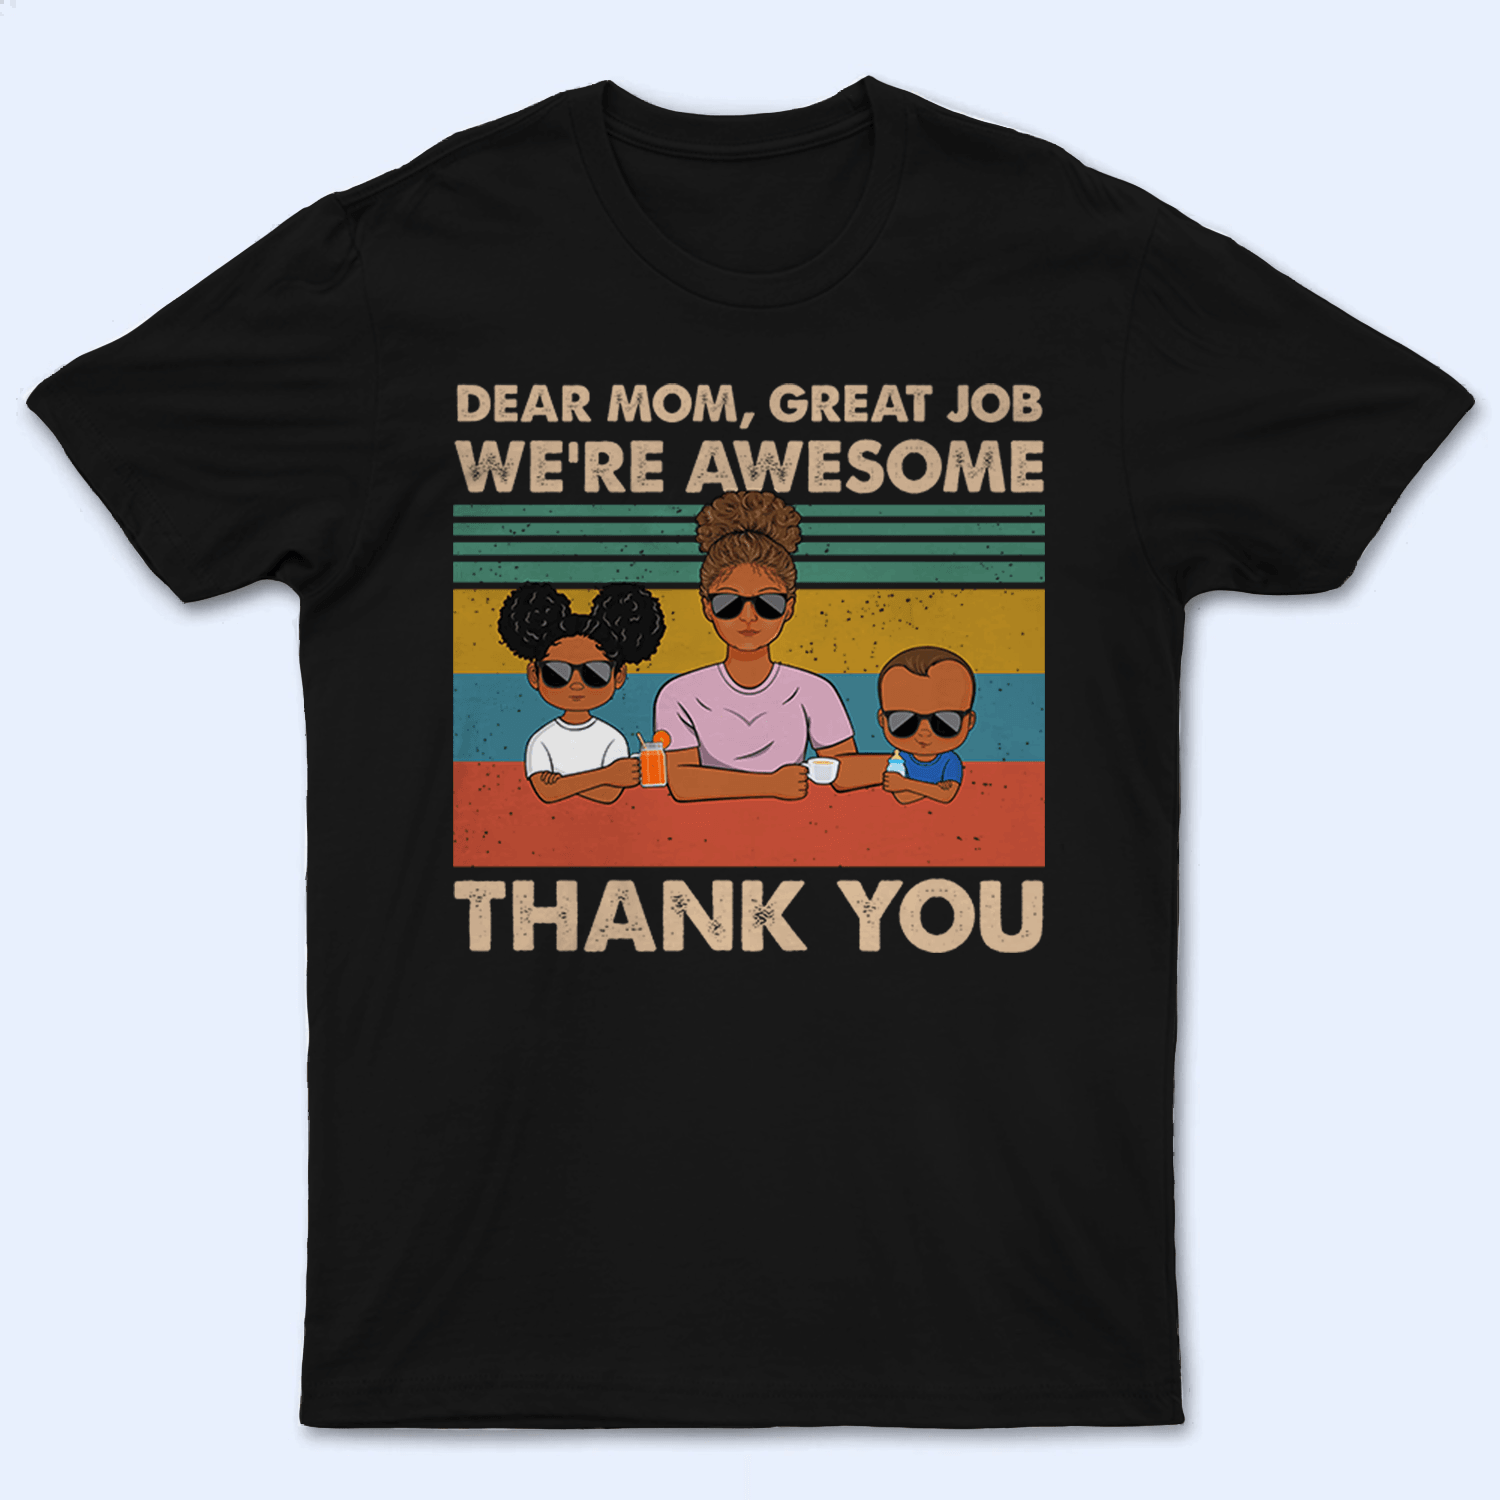 Dear Mom, Great Job We're Awesome Thank You - Personalized Custom T-Shirt - Gift For Mom, Mother, Grandma, Grandmother, Mother's Day